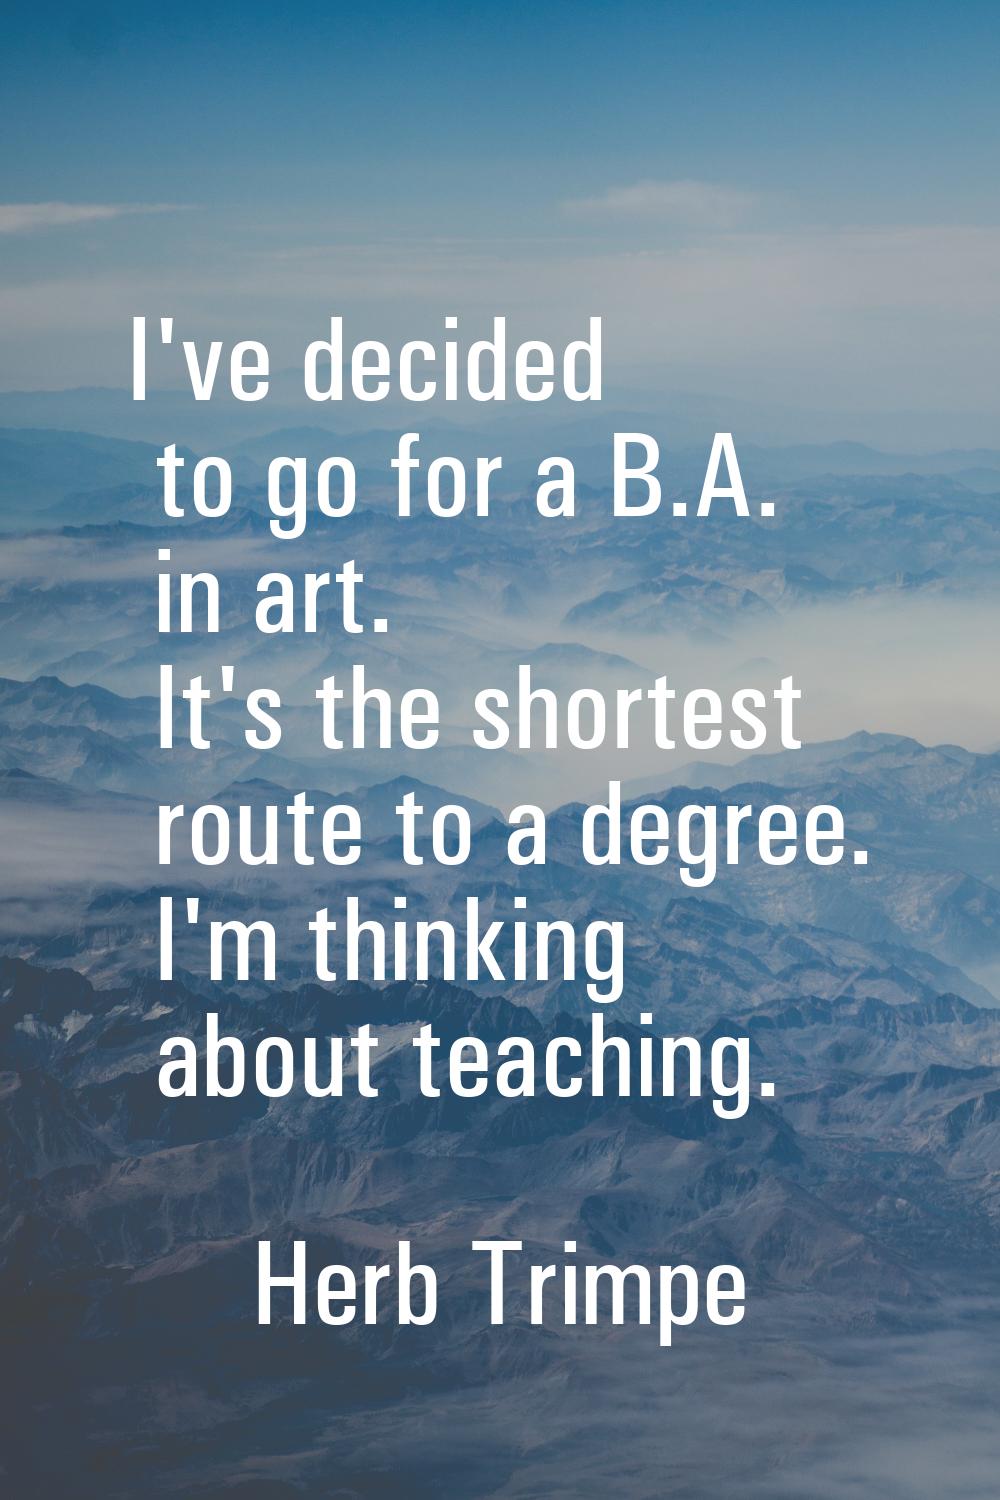 I've decided to go for a B.A. in art. It's the shortest route to a degree. I'm thinking about teach